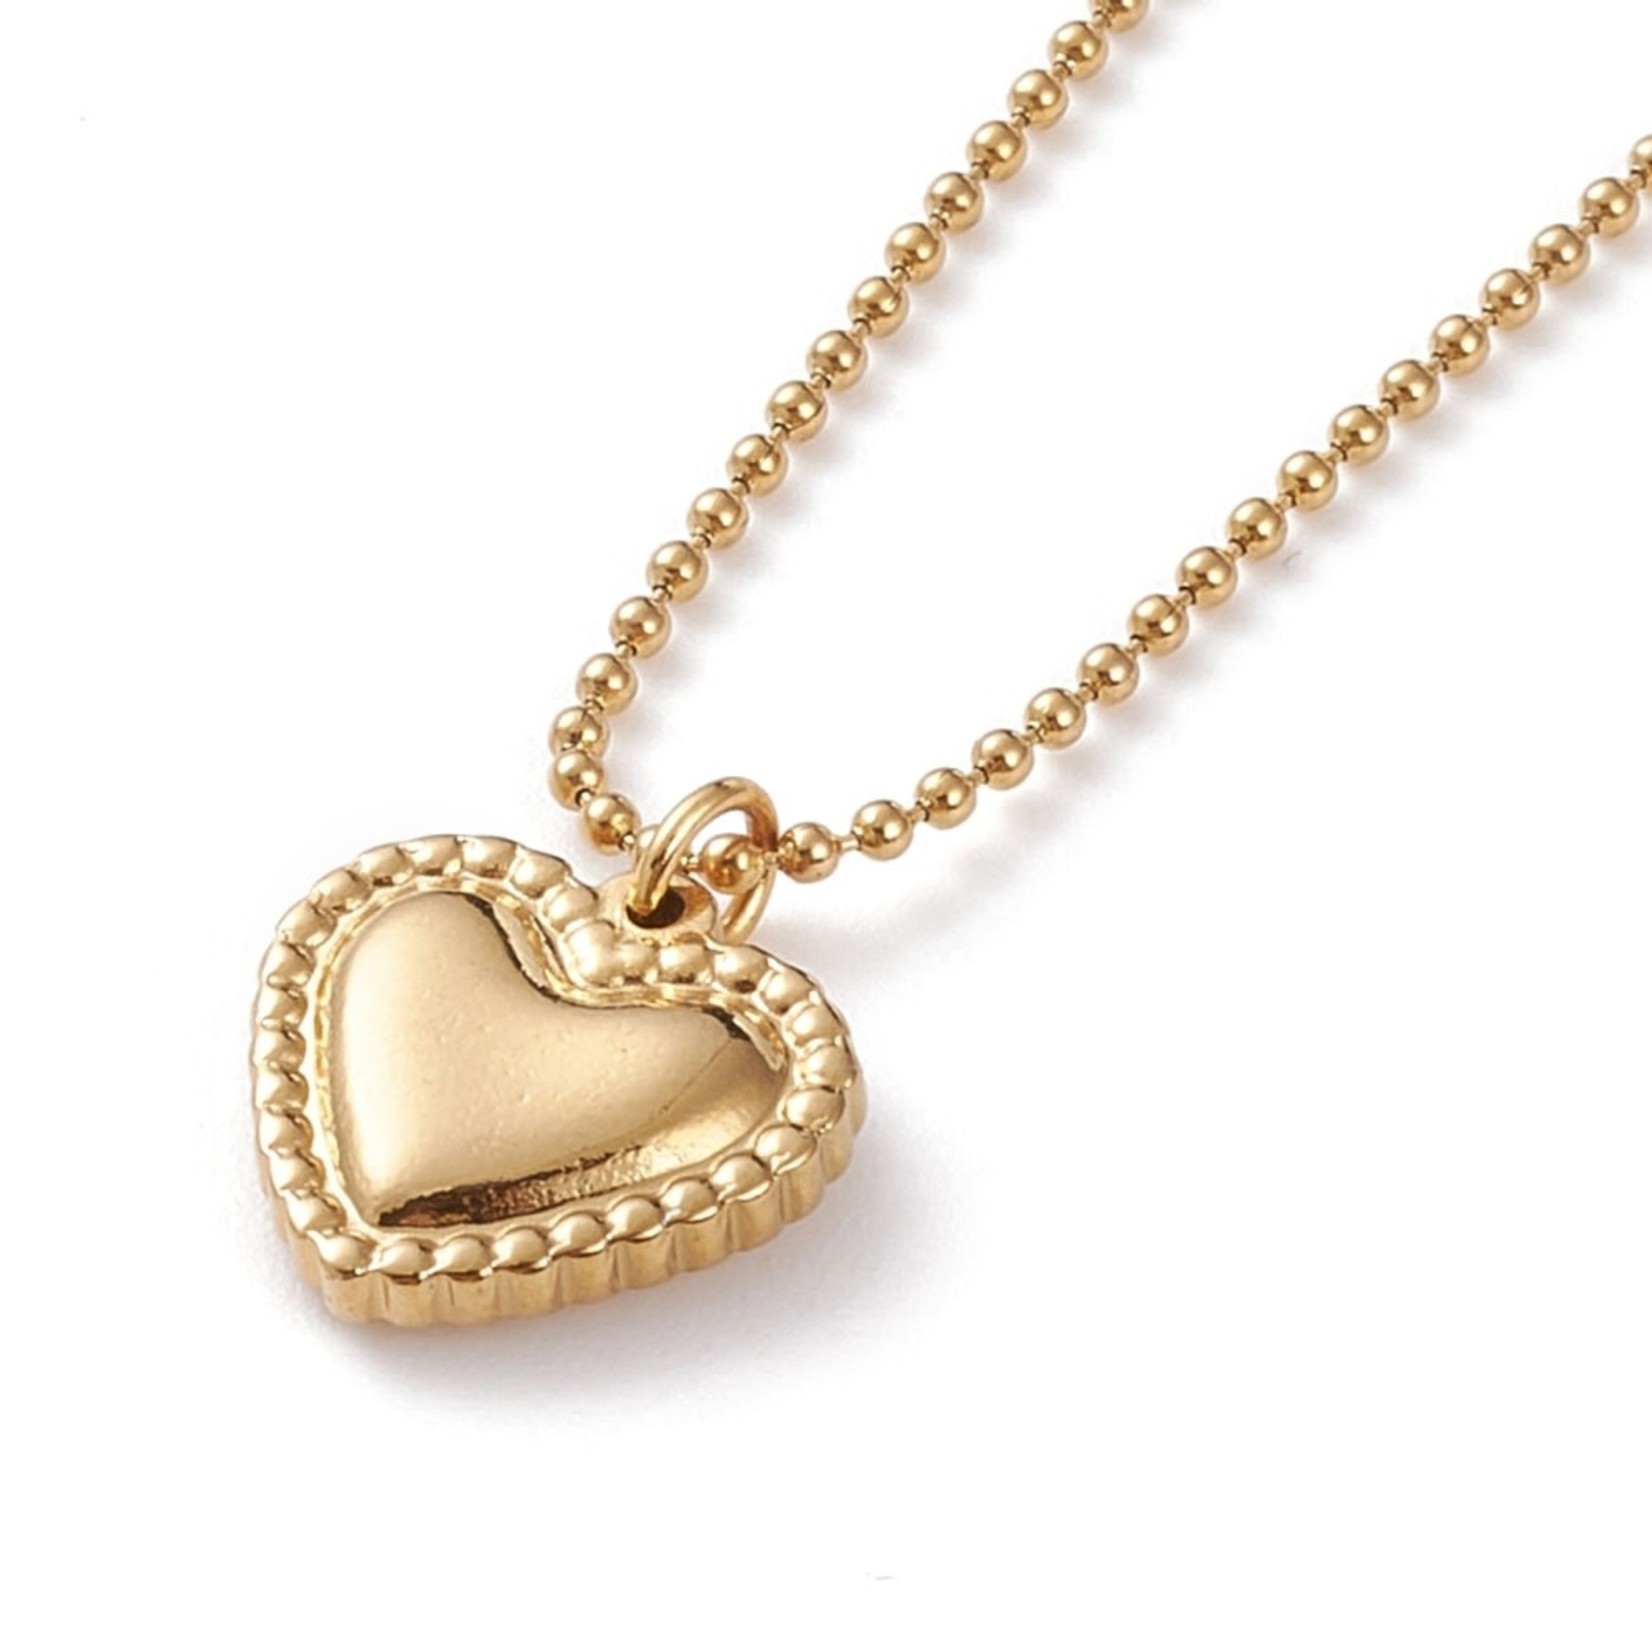 Fashion Jewelry GOLD STAINLESS HEART NECKLACE FJN18